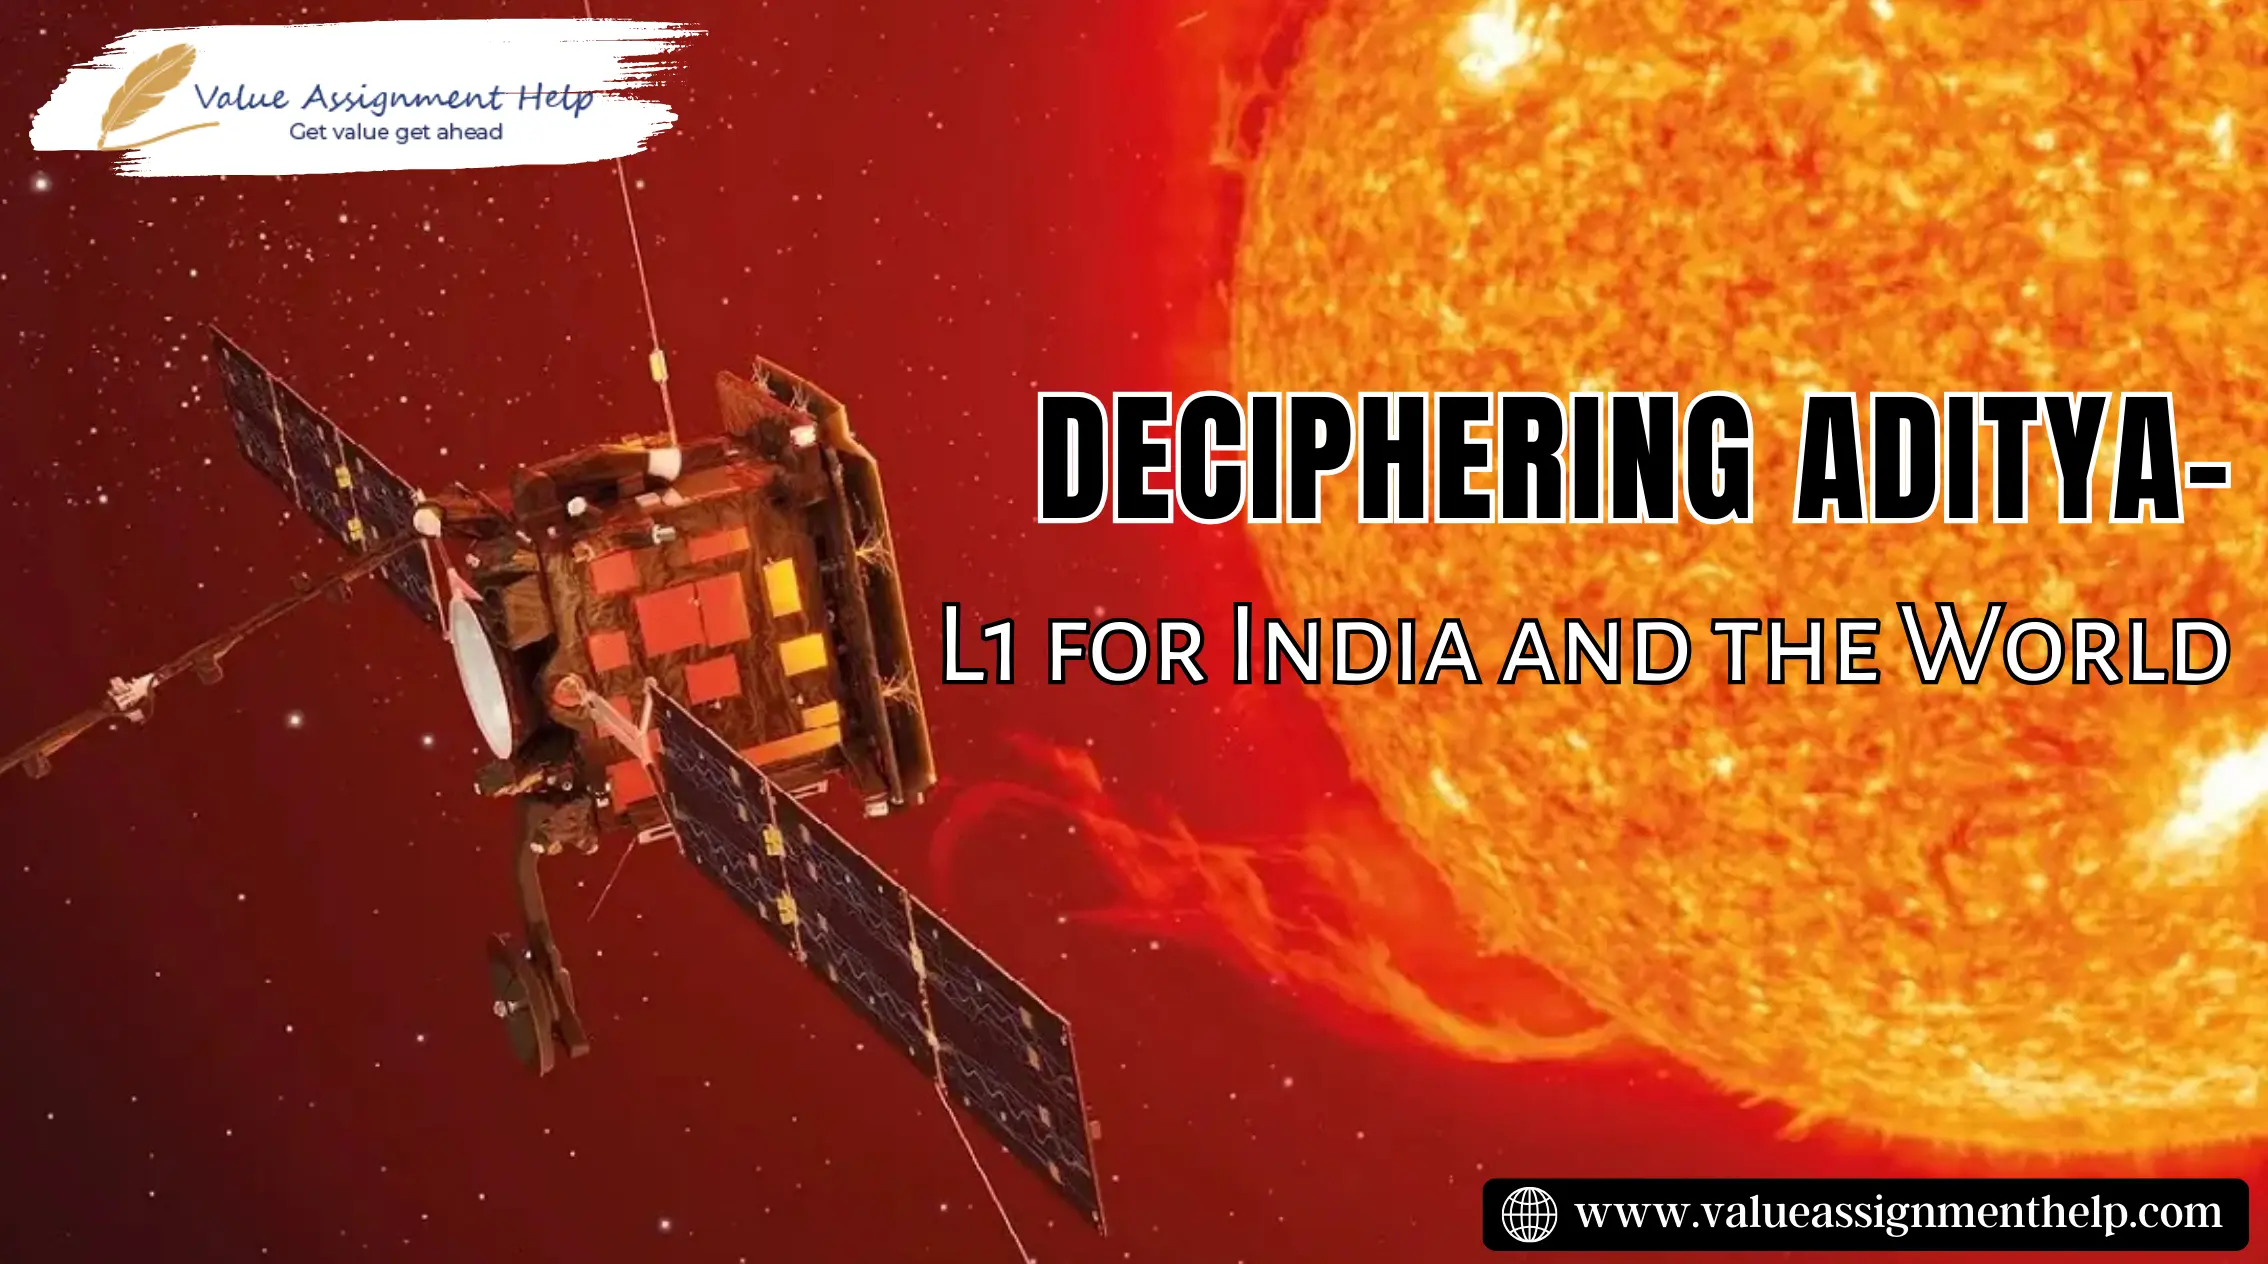  Deciphering Aditya- L1 for India and the World